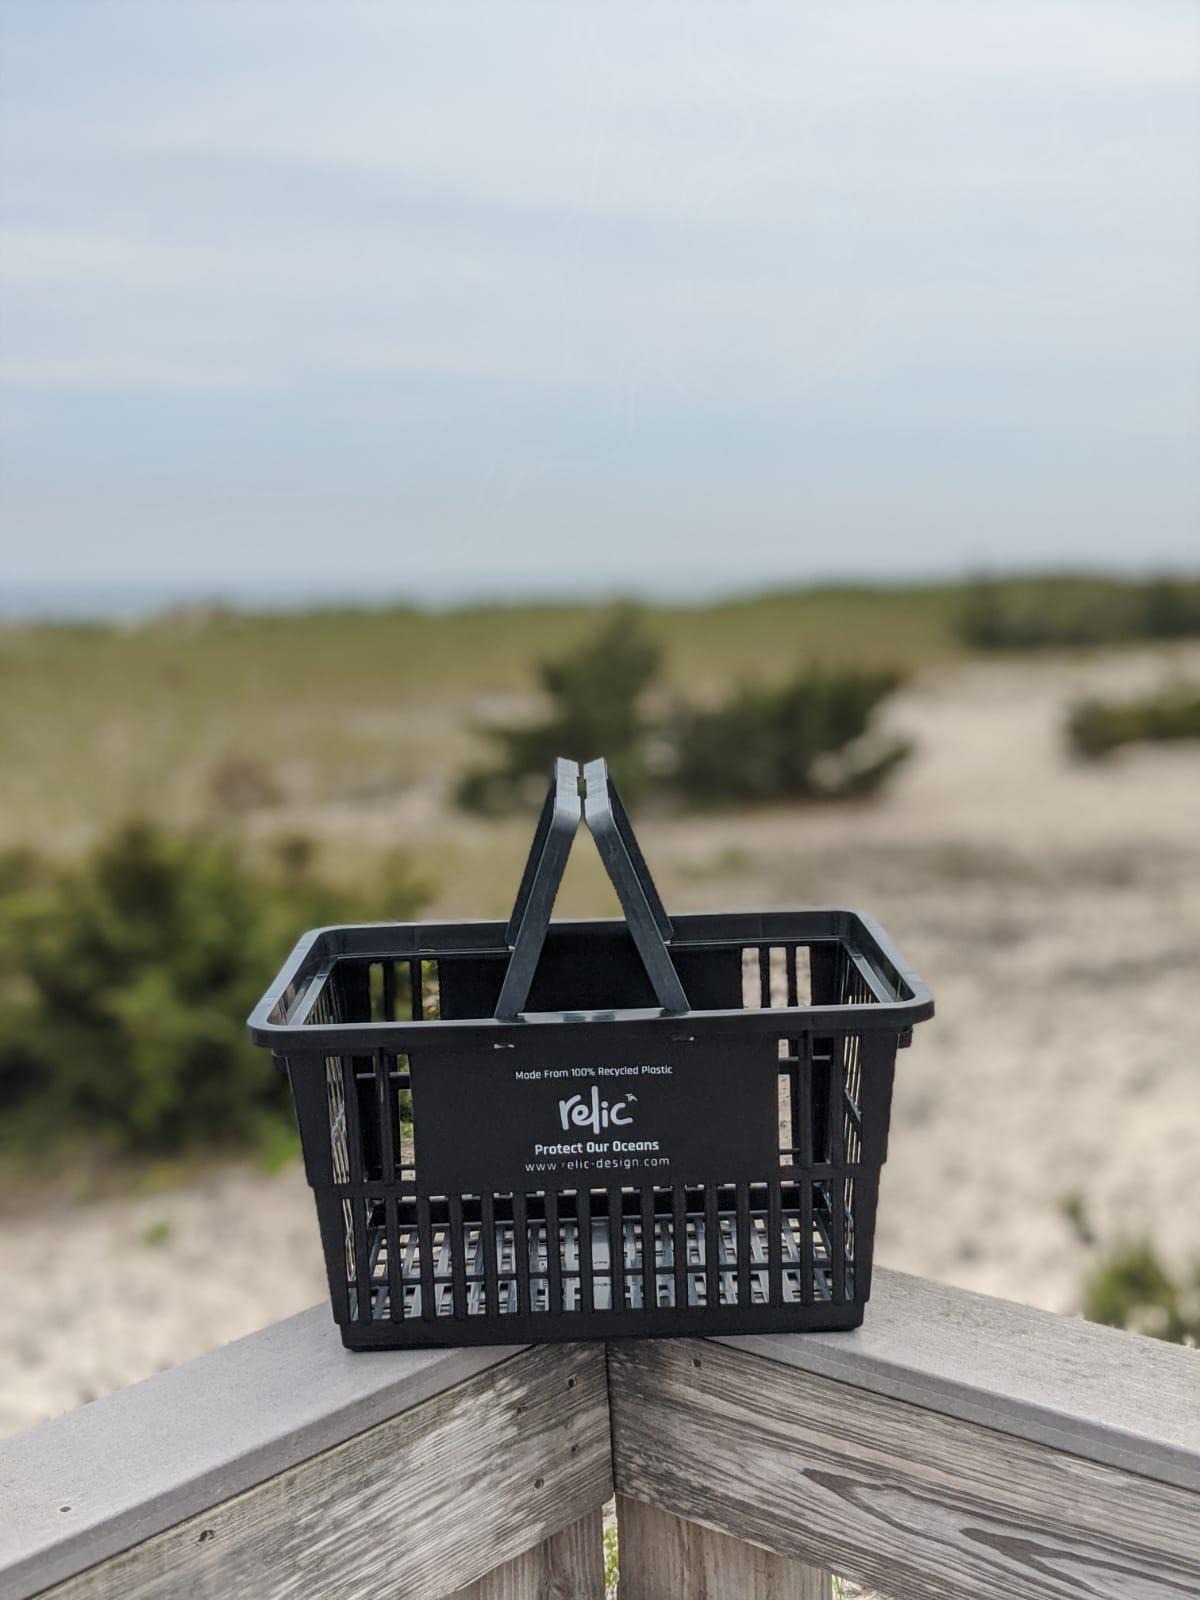 Relic has set up cleanup stations at several lcoal beaches in Westhampton Beach.